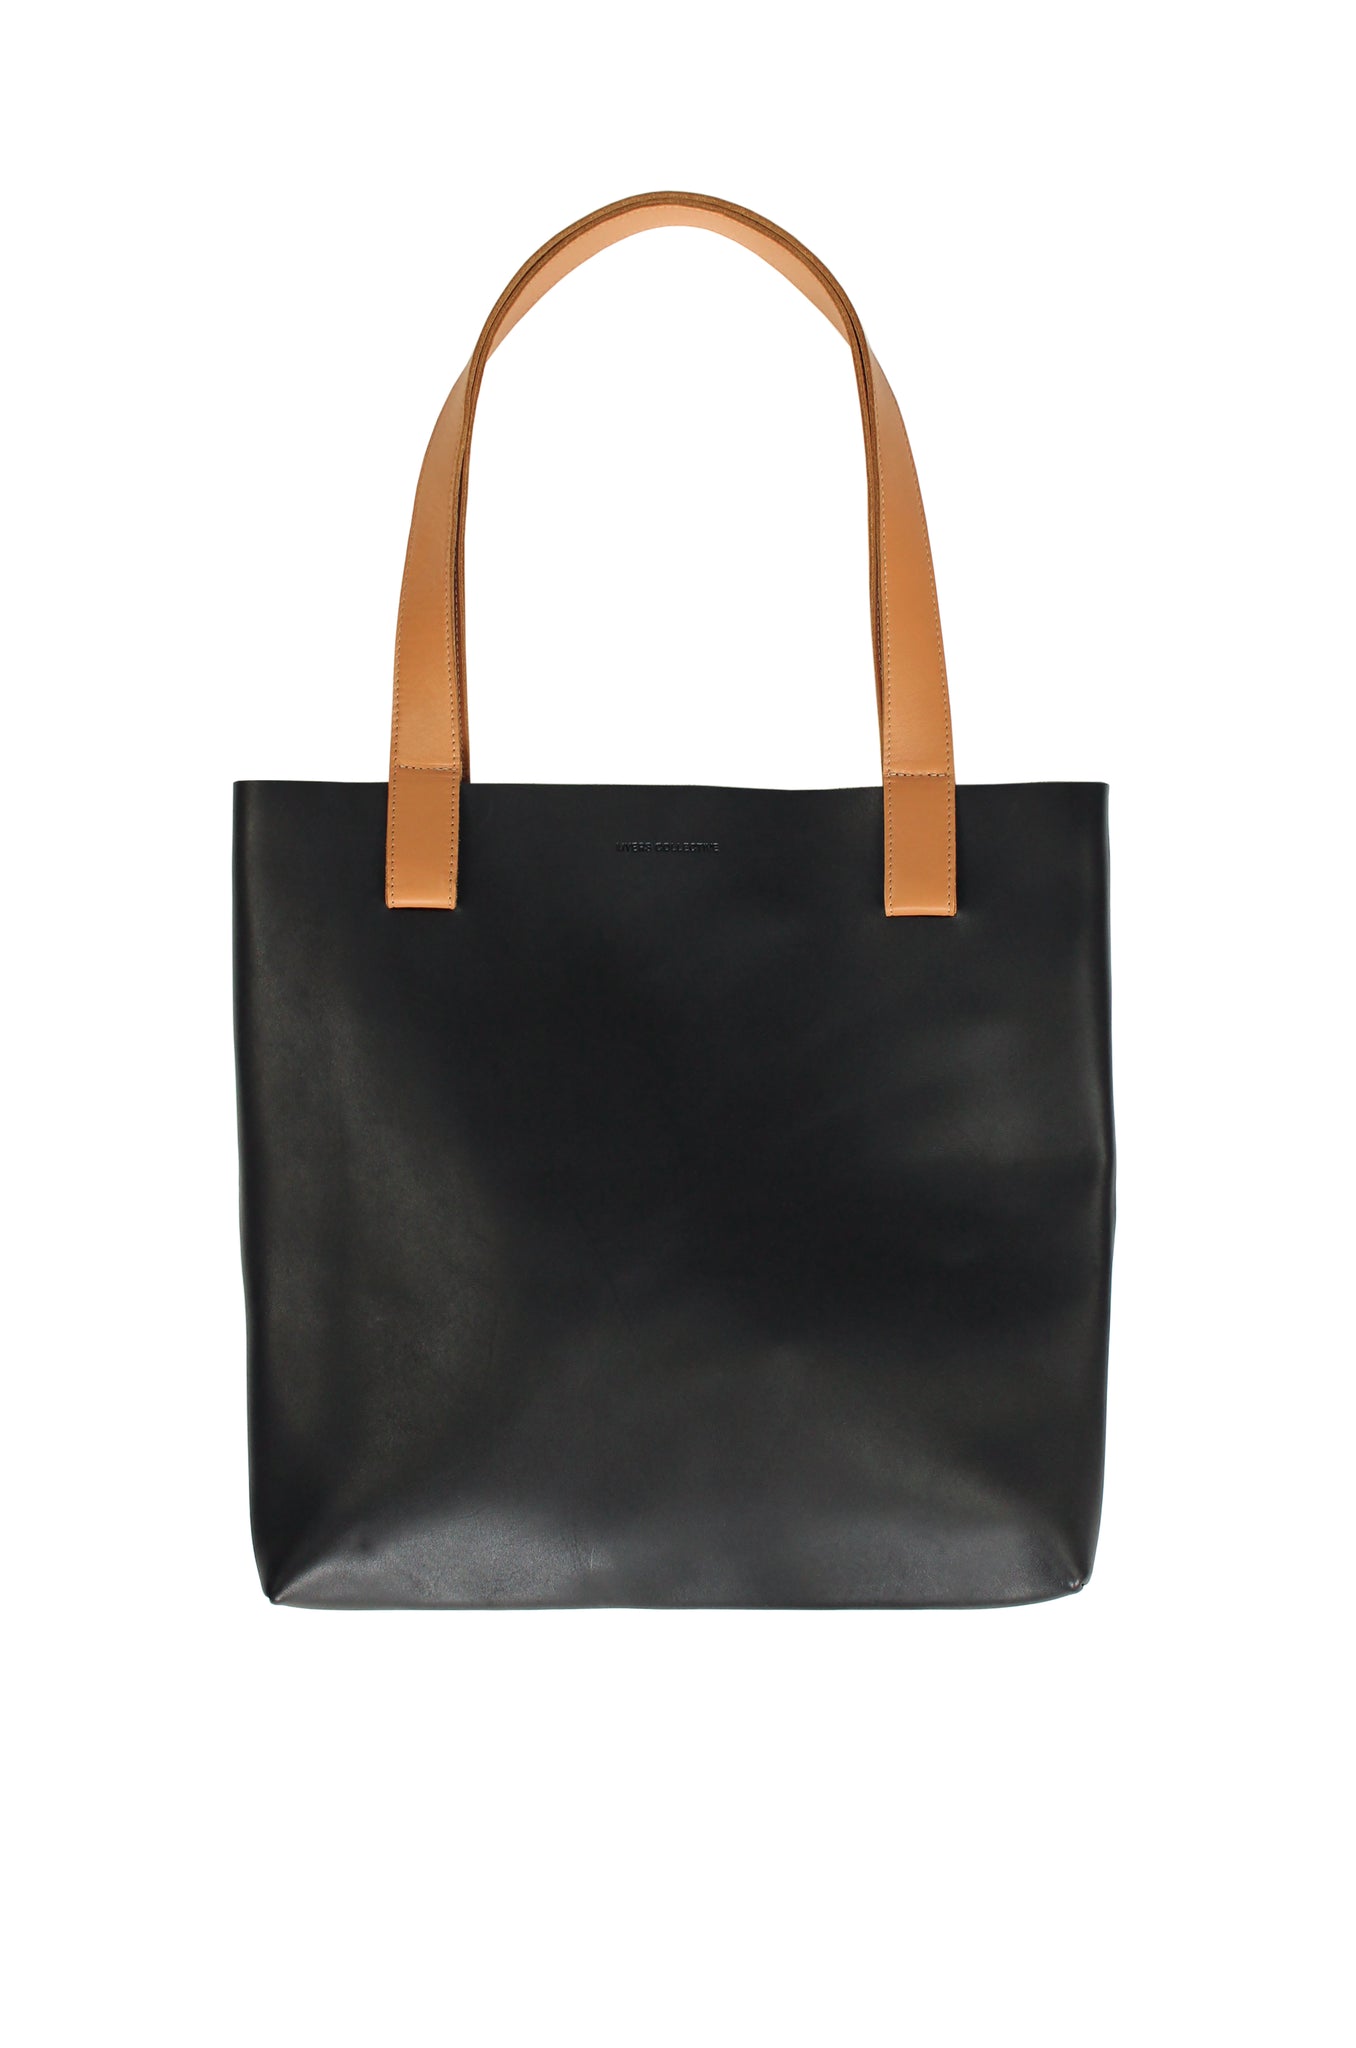 Myers Collective Square Tote Black body / Honey strap